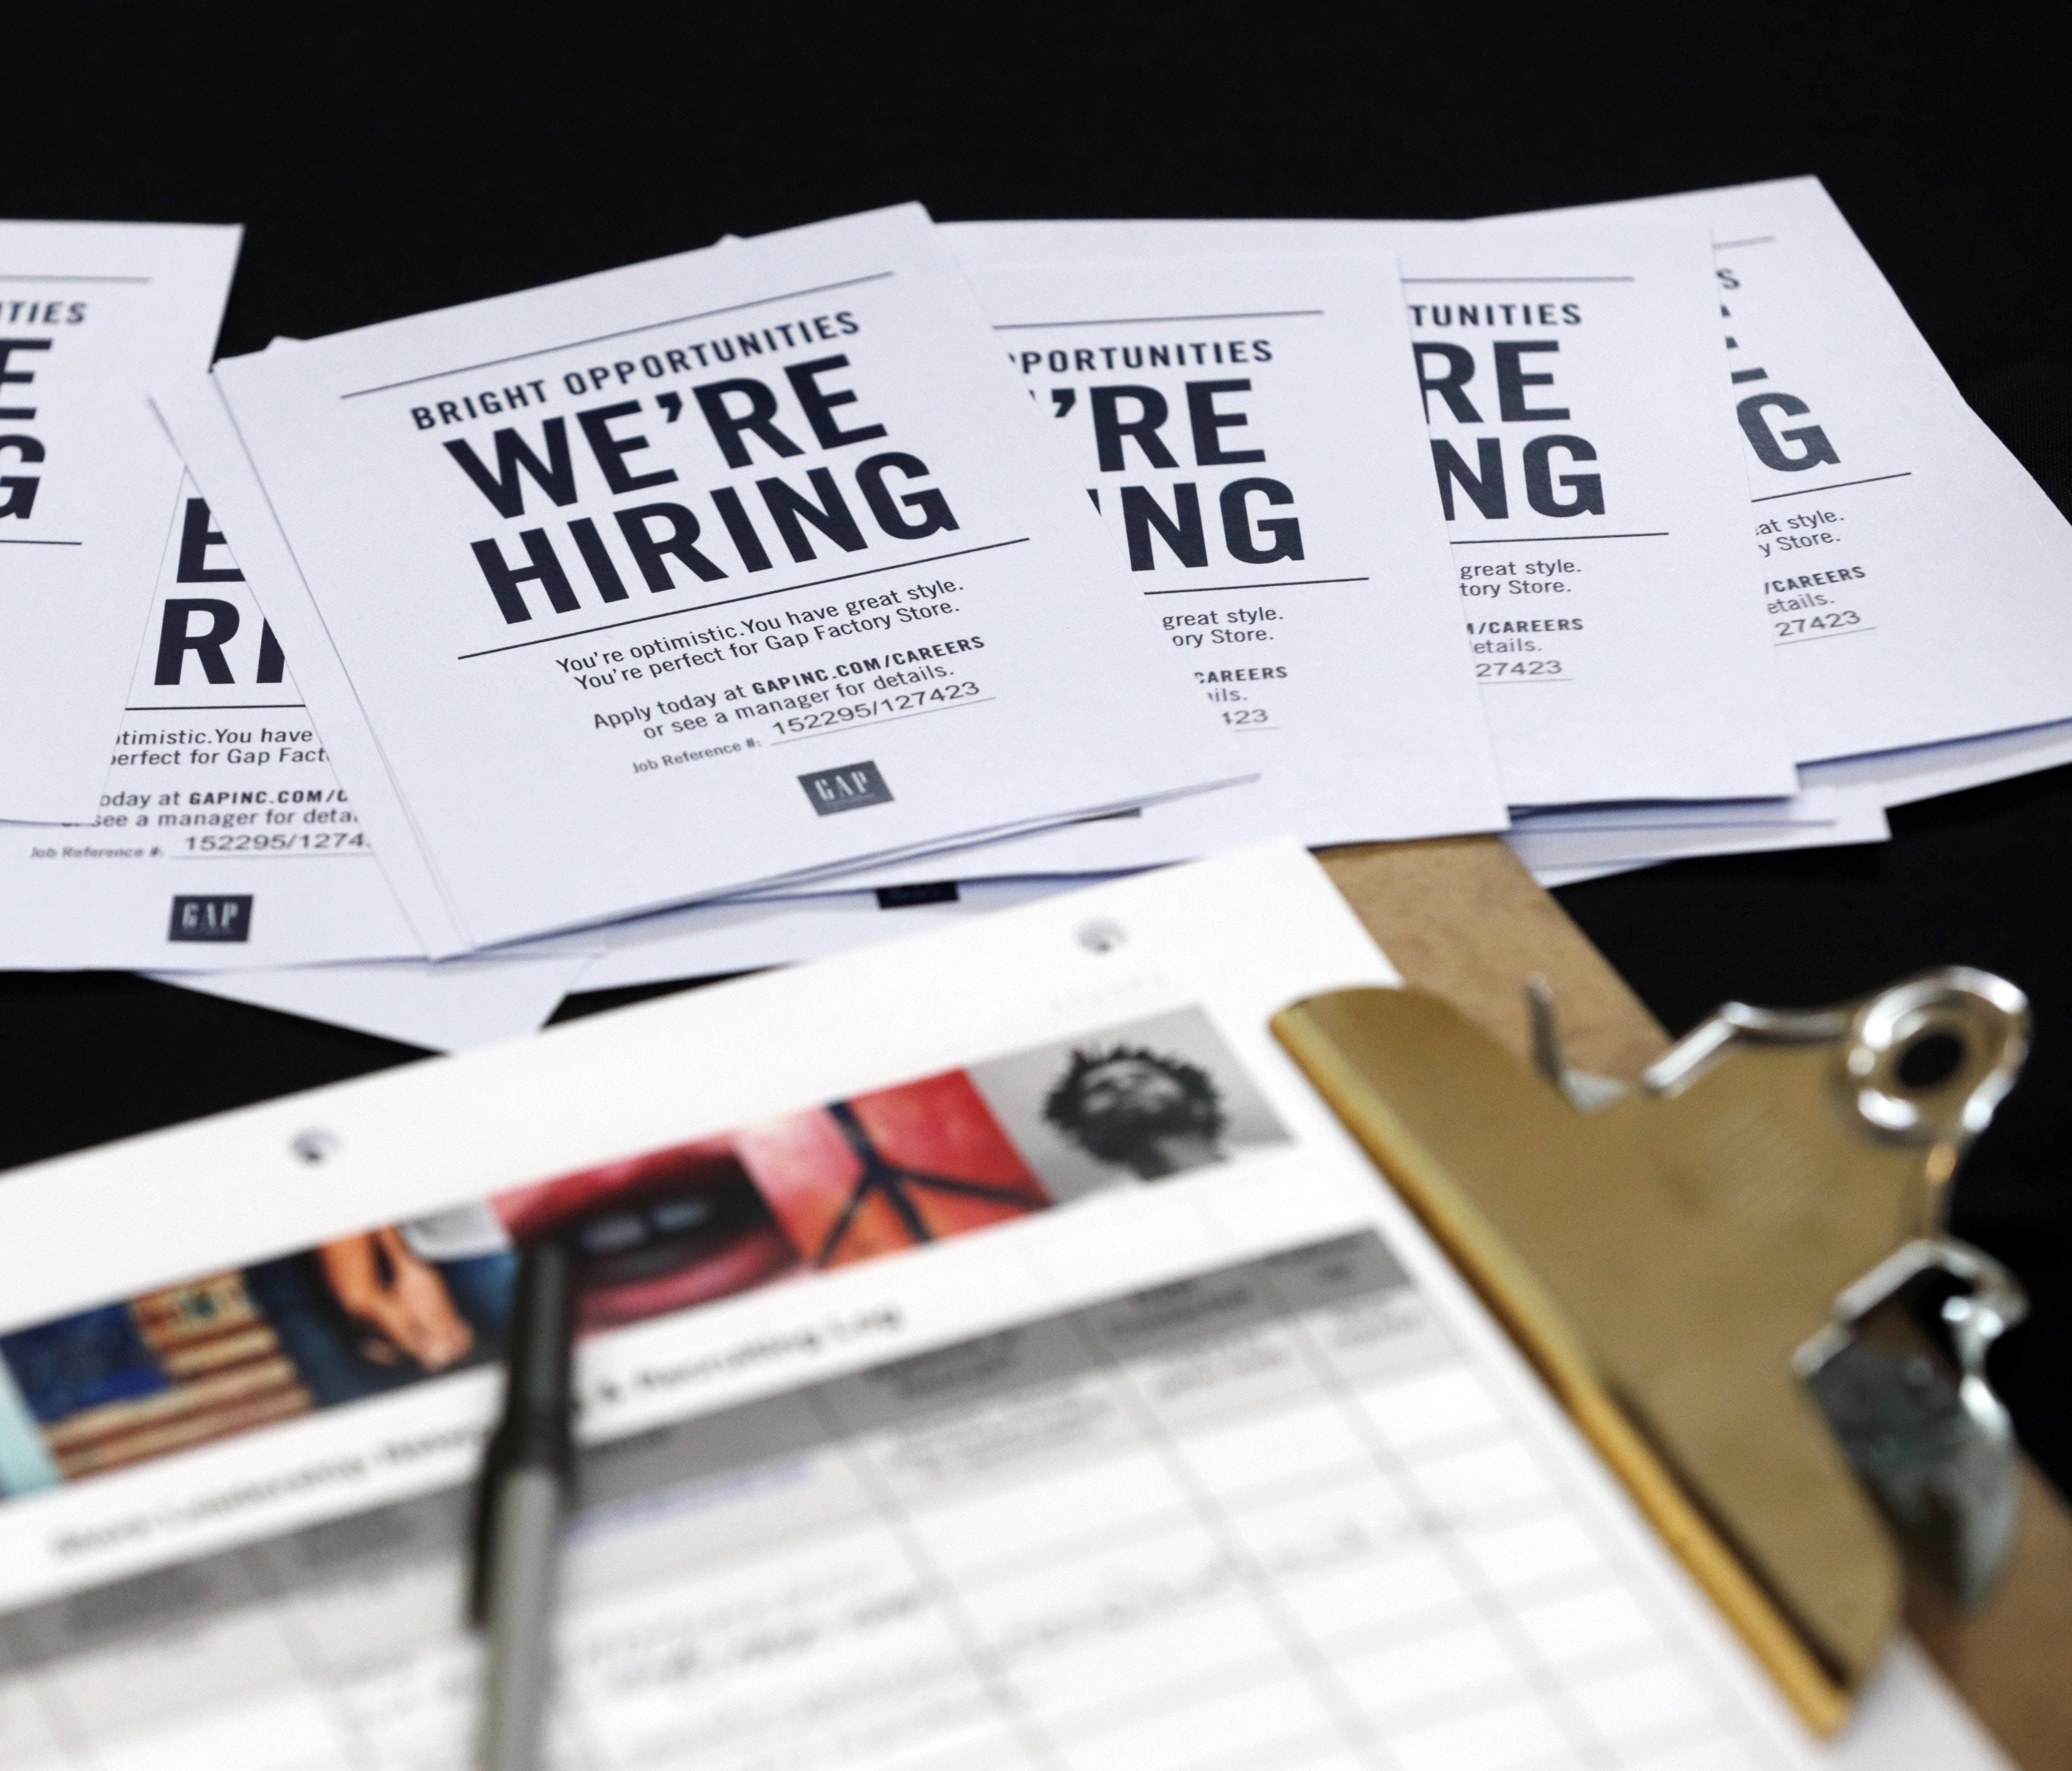 Job applications and information for the Gap Factory Store sit on a table during a job fair at Dolphin Mall in Miami in 2015. As of the latest jobs report, the five fastest-growing sectors in the 12 months prior have been: temporary help, professiona